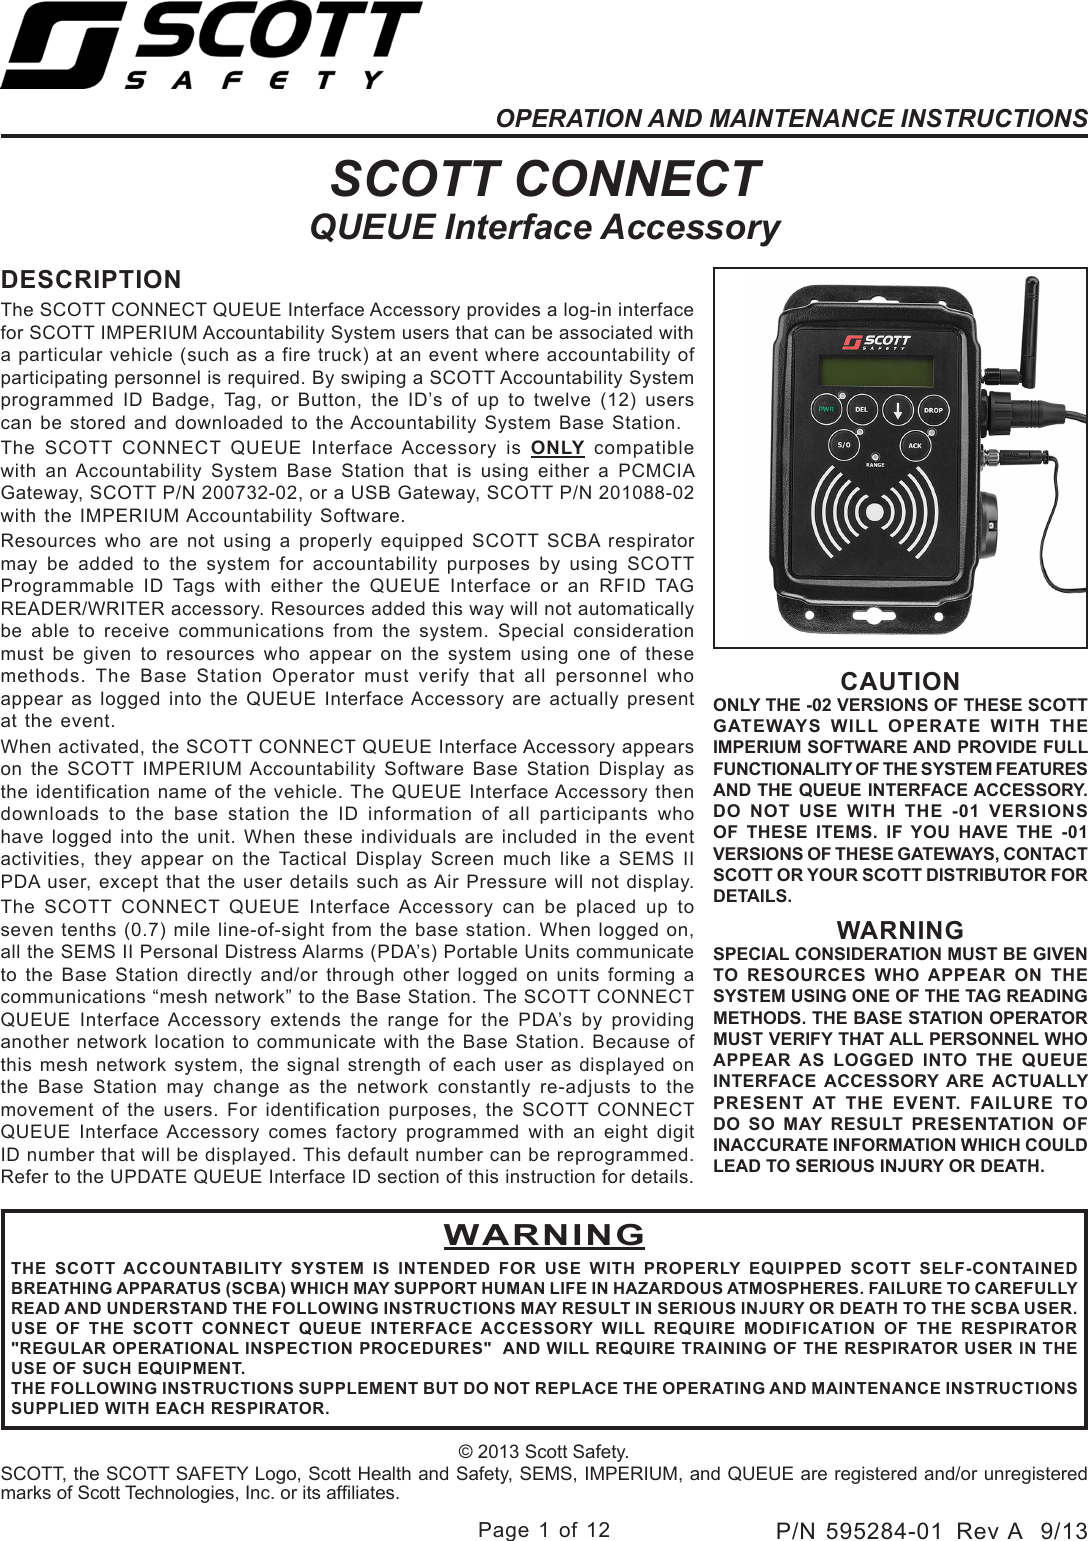 Page 1 of 12P/N 595284-01  Rev A  9/13OPERATION AND MAINTENANCE INSTRUCTIONSSCOTT CONNECTQUEUE Interface AccessoryDESCRIPTIONThe SCOTT CONNECT QUEUE Interface Accessory provides a log-in interface for SCOTT IMPERIUM Accountability System users that can be associated with a particular vehicle (such as a fire truck) at an event where accountability of participating personnel is required. By swiping a SCOTT Accountability System programmed ID Badge, Tag, or Button, the ID’s of up to twelve (12) users can be stored and downloaded to the Accountability System Base Station. The SCOTT CONNECT QUEUE Interface Accessory is ONLY compatible with an Accountability System Base Station that is using either a PCMCIA Gateway, SCOTT P/N 200732-02, or a USB Gateway, SCOTT P/N 201088-02 with the IMPERIUM Accountability Software.Resources who are not using a properly equipped SCOTT SCBA respirator may be added to the system for accountability purposes by using SCOTT Programmable ID Tags with either the QUEUE Interface or an RFID TAG READER/WRITER accessory. Resources added this way will not automatically be able to receive communications from the system. Special consideration must be given to resources who appear on the system using one of these methods. The Base Station Operator must verify that all personnel who appear as logged into the QUEUE Interface Accessory are actually present at the event.When activated, the SCOTT CONNECT QUEUE Interface Accessory appears on the SCOTT IMPERIUM Accountability Software Base Station Display as the identification name of the vehicle. The QUEUE Interface Accessory then downloads to the base station the ID information of all participants who have logged into the unit. When these individuals are included in the event activities, they appear on the Tactical Display Screen much like a SEMS II PDA user, except that the user details such as Air Pressure will not display. The SCOTT CONNECT QUEUE Interface Accessory can be placed up to seven tenths (0.7) mile line-of-sight from the base station. When logged on, all the SEMS II Personal Distress Alarms (PDA’s) Portable Units communicate to the Base Station directly and/or through other logged on units forming a communications “mesh network” to the Base Station. The SCOTT CONNECT QUEUE Interface Accessory extends the range for the PDA’s by providing another network location to communicate with the Base Station. Because of this mesh network system, the signal strength of each user as displayed on the Base Station may change as the network constantly re-adjusts to the movement of the users. For identification purposes, the SCOTT CONNECT QUEUE Interface Accessory comes factory programmed with an eight digit ID number that will be displayed. This default number can be reprogrammed. Refer to the UPDATE QUEUE Interface ID section of this instruction for details.© 2013 Scott Safety.SCOTT, the SCOTT SAFETY Logo, Scott Health and Safety, SEMS, IMPERIUM, and QUEUE are registered and/or unregistered marks of Scott Technologies, Inc. or its afliates.WARNINGTHE SCOTT ACCOUNTABILITY SYSTEM IS INTENDED FOR USE WITH PROPERLY EQUIPPED SCOTT SELF-CONTAINED BREATHING APPARATUS (SCBA) WHICH MAY SUPPORT HUMAN LIFE IN HAZARDOUS ATMOSPHERES. FAILURE TO CAREFULLY READ AND UNDERSTAND THE FOLLOWING INSTRUCTIONS MAY RESULT IN SERIOUS INJURY OR DEATH TO THE SCBA USER.USE OF THE SCOTT CONNECT QUEUE INTERFACE ACCESSORY WILL REQUIRE MODIFICATION OF THE RESPIRATOR &quot;REGULAR OPERATIONAL INSPECTION PROCEDURES&quot;  AND WILL REQUIRE TRAINING OF THE RESPIRATOR USER IN THE USE OF SUCH EQUIPMENT.THE FOLLOWING INSTRUCTIONS SUPPLEMENT BUT DO NOT REPLACE THE OPERATING AND MAINTENANCE INSTRUCTIONS SUPPLIED WITH EACH RESPIRATOR.CAUTIONONLY THE -02 VERSIONS OF THESE SCOTT GATEWAYS WILL OPERATE WITH THE IMPERIUM SOFTWARE AND PROVIDE FULL FUNCTIONALITY OF THE SYSTEM FEATURES AND THE QUEUE INTERFACE ACCESSORY. DO NOT USE WITH THE -01 VERSIONS OF THESE ITEMS. IF YOU HAVE THE -01 VERSIONS OF THESE GATEWAYS, CONTACT SCOTT OR YOUR SCOTT DISTRIBUTOR FOR DETAILS.WARNINGSPECIAL CONSIDERATION MUST BE GIVEN TO RESOURCES WHO APPEAR ON THE SYSTEM USING ONE OF THE TAG READING METHODS. THE BASE STATION OPERATOR MUST VERIFY THAT ALL PERSONNEL WHO APPEAR AS LOGGED INTO THE QUEUE INTERFACE ACCESSORY ARE ACTUALLY PRESENT AT THE EVENT. FAILURE TO DO SO MAY RESULT PRESENTATION OF INACCURATE INFORMATION WHICH COULD LEAD TO SERIOUS INJURY OR DEATH.